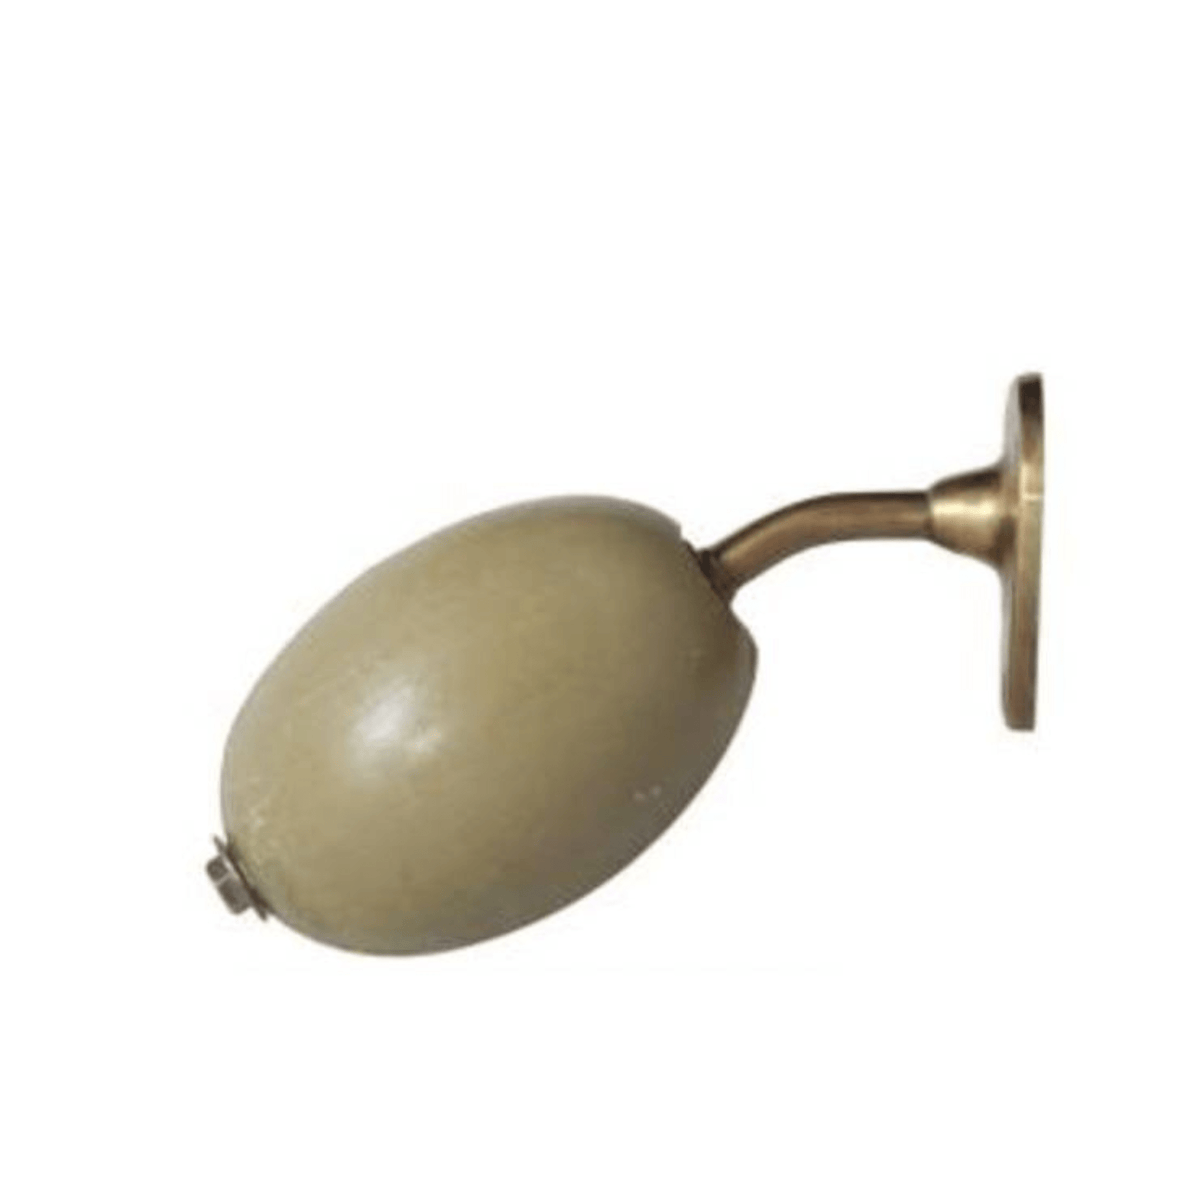 Alternate Image of Olive Oil Marseille Soap To Hang - Brass Holder and Soap